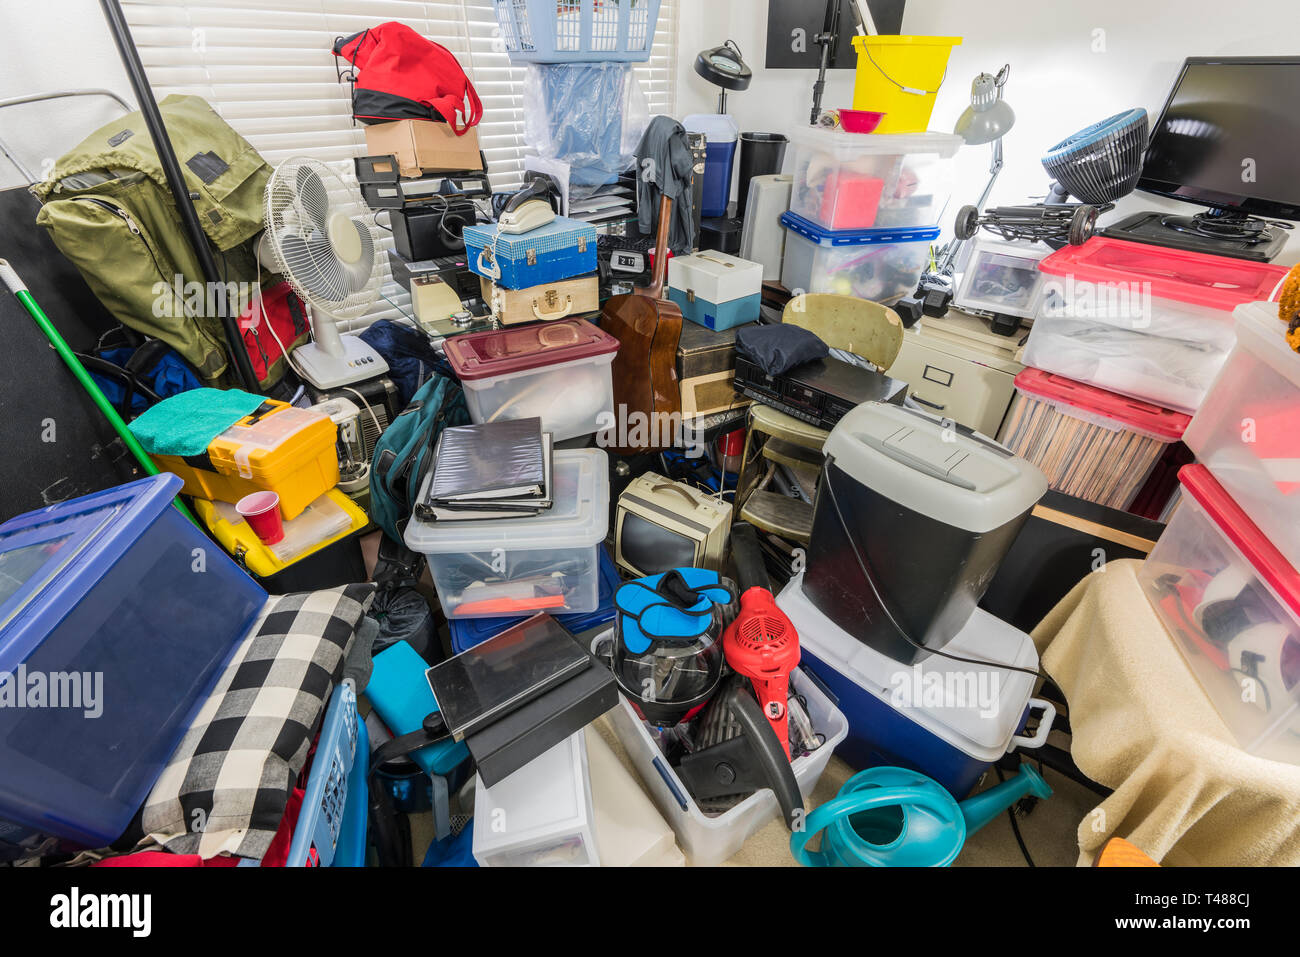 Packed storage room filled with boxes, files, electronics, business equipment, sporting goods and household items. Stock Photo